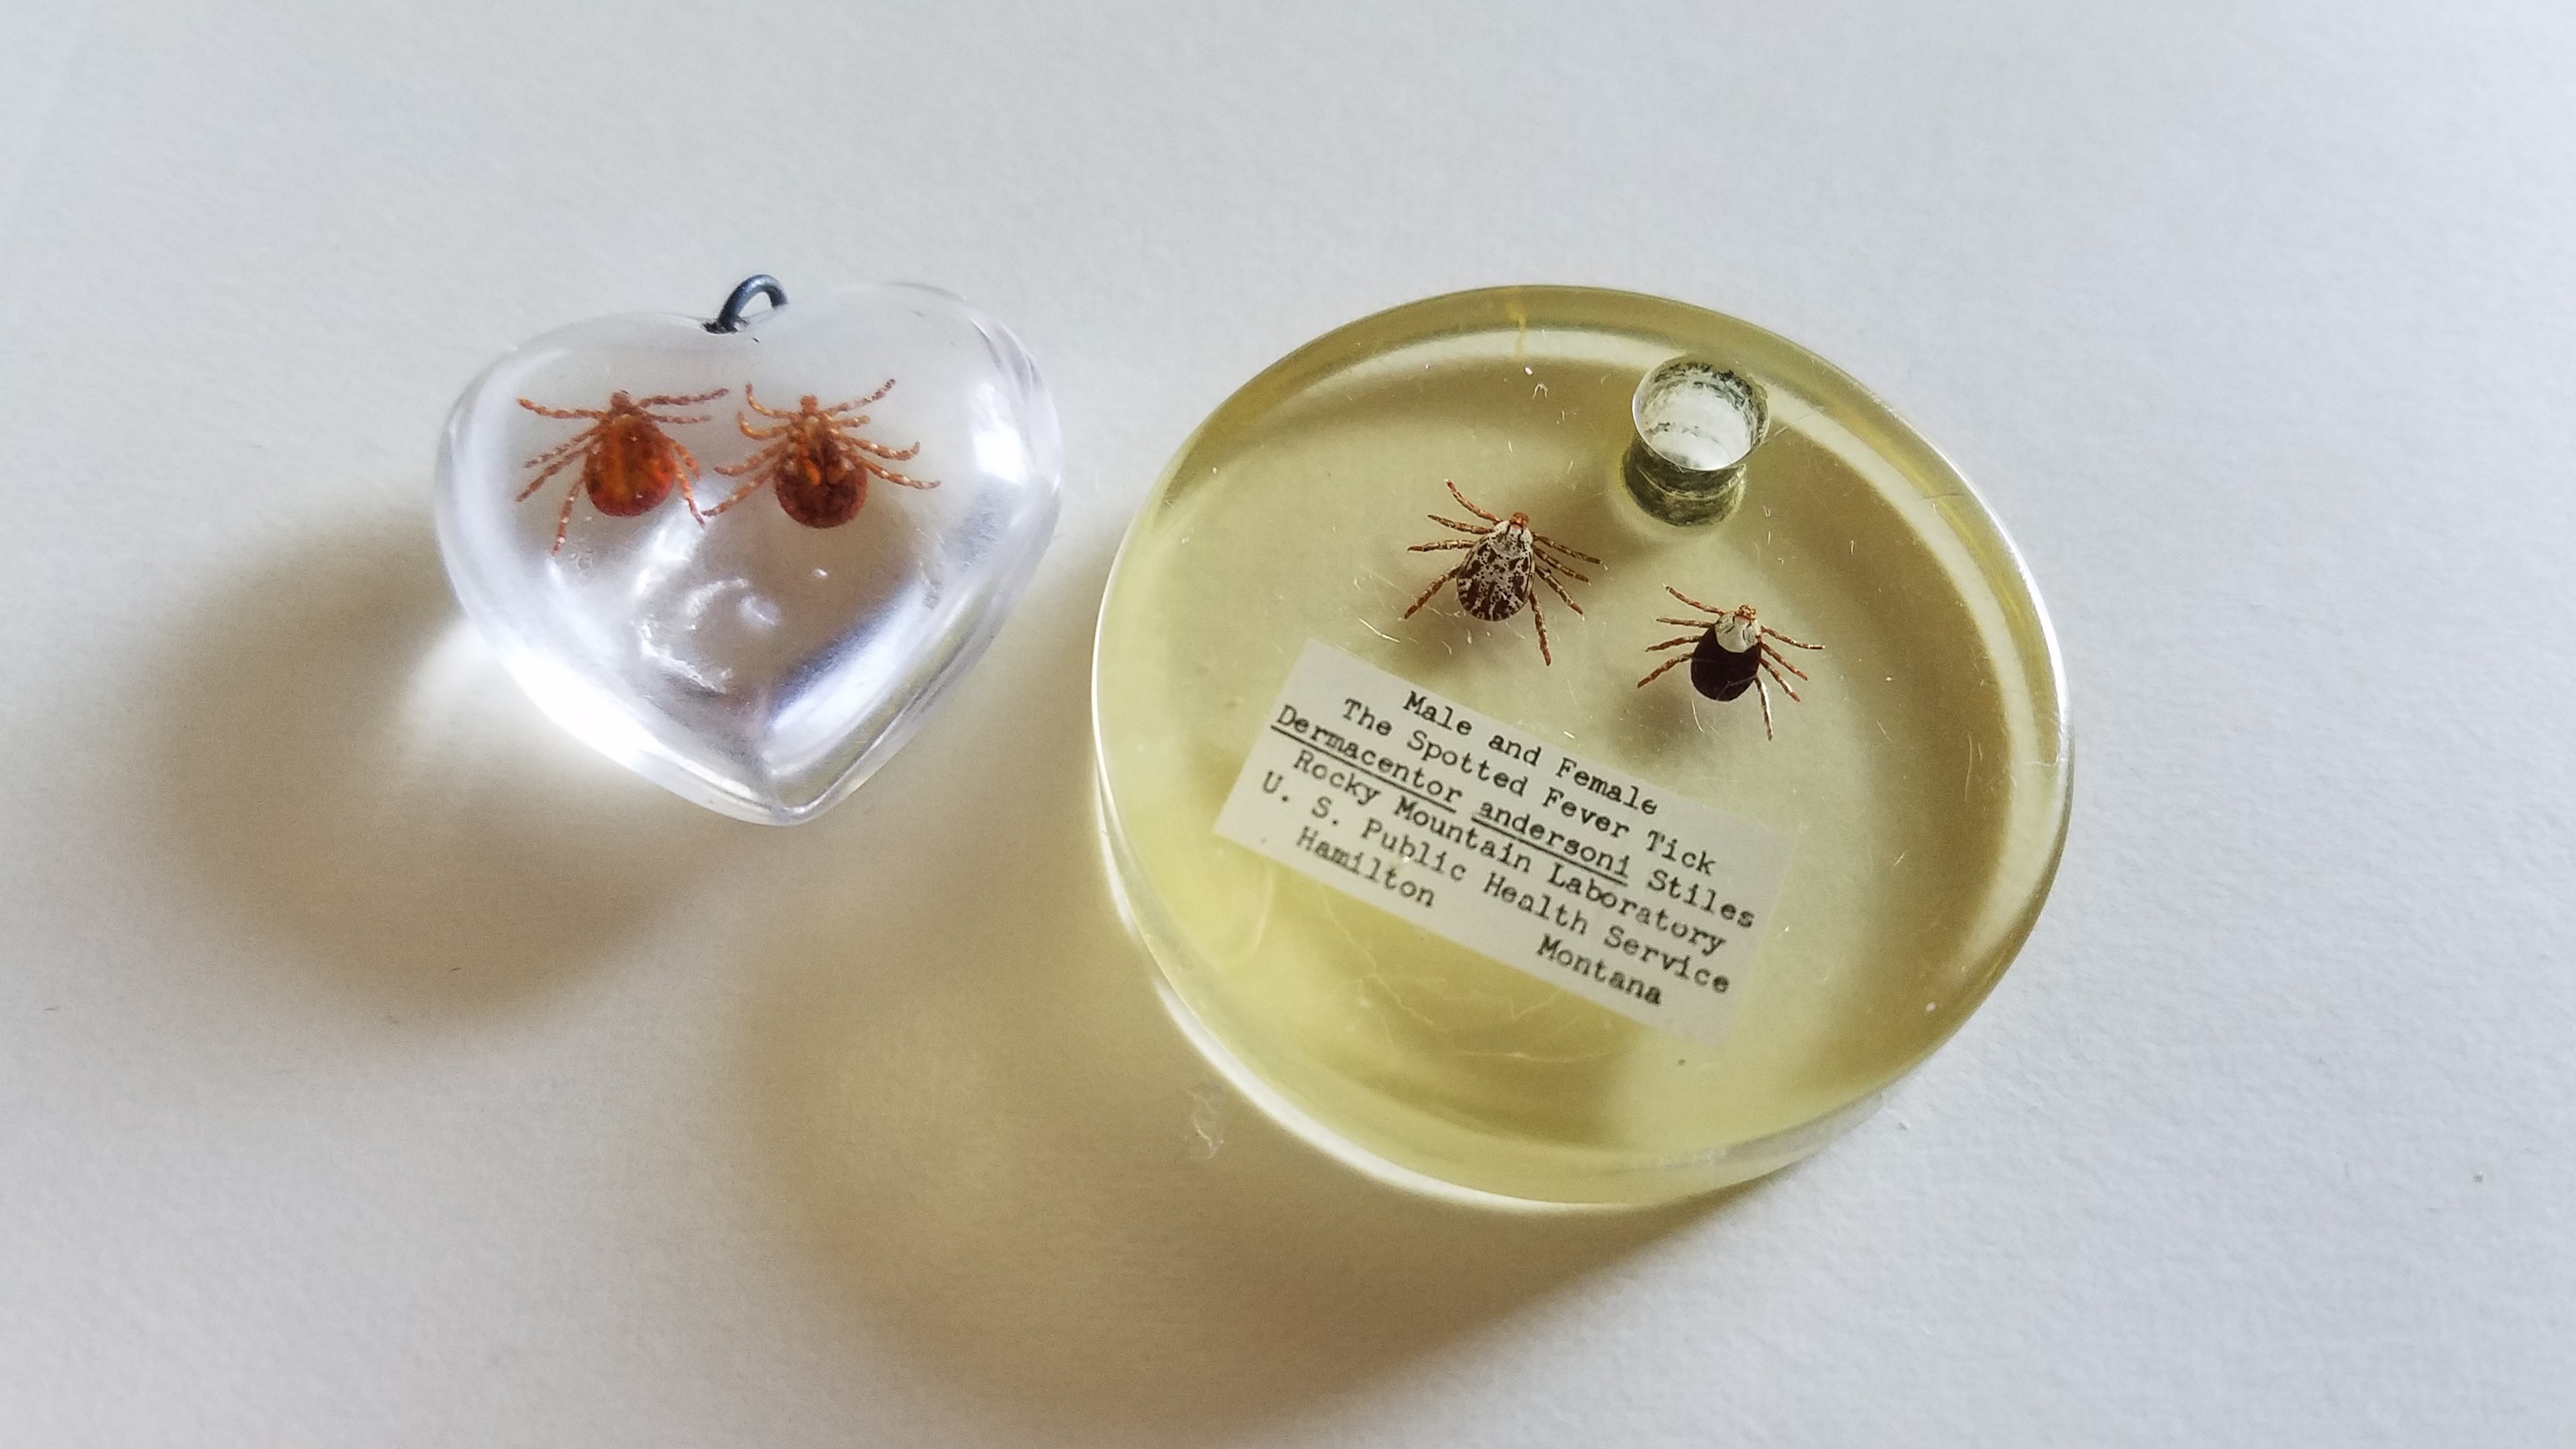 Ticks are encased in a heart pendant and a round pendant